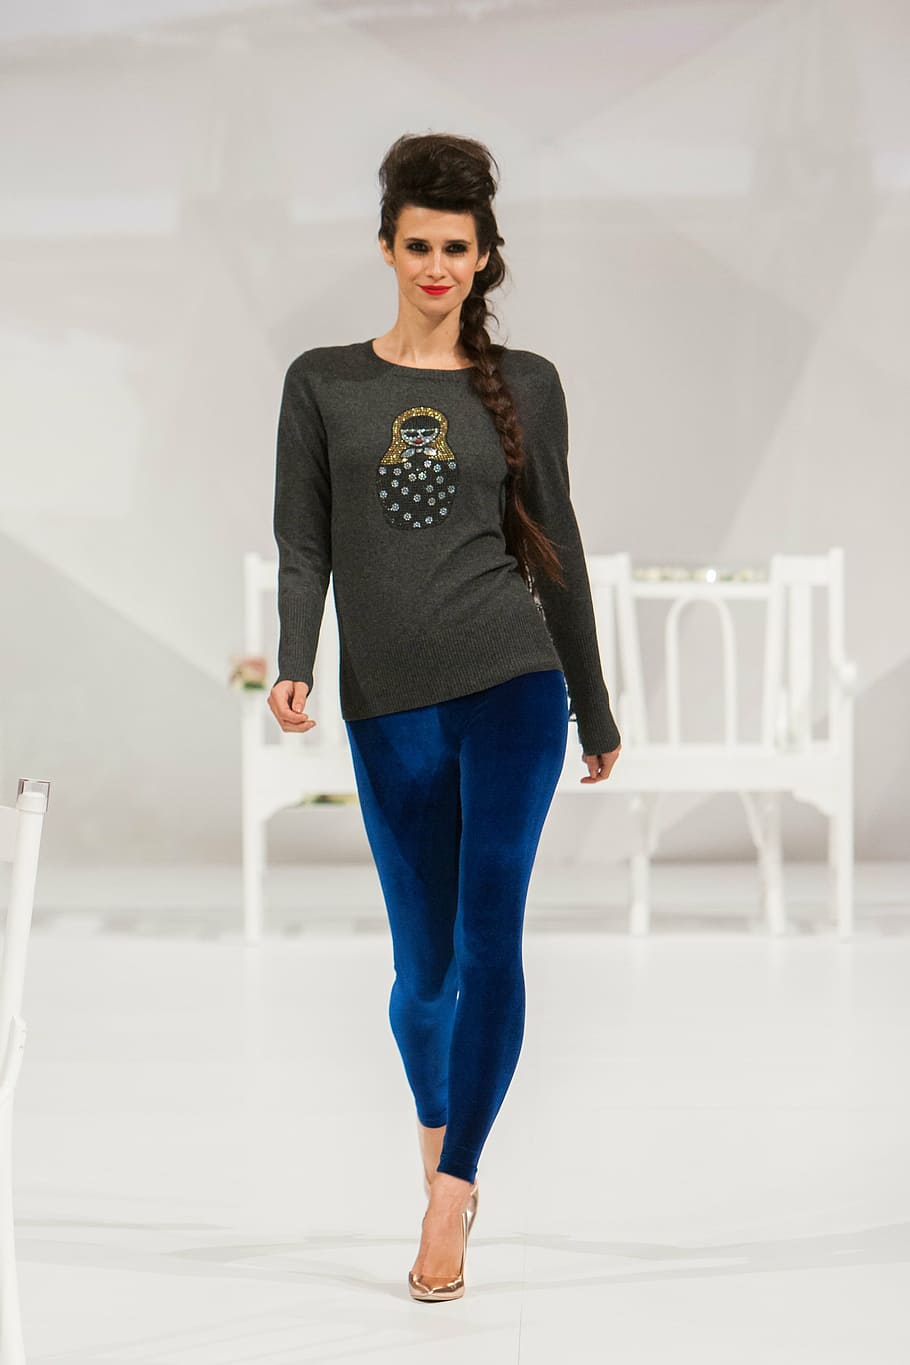 women's gray long-sleeved shirt and blue pants indoor, fashion show, HD wallpaper